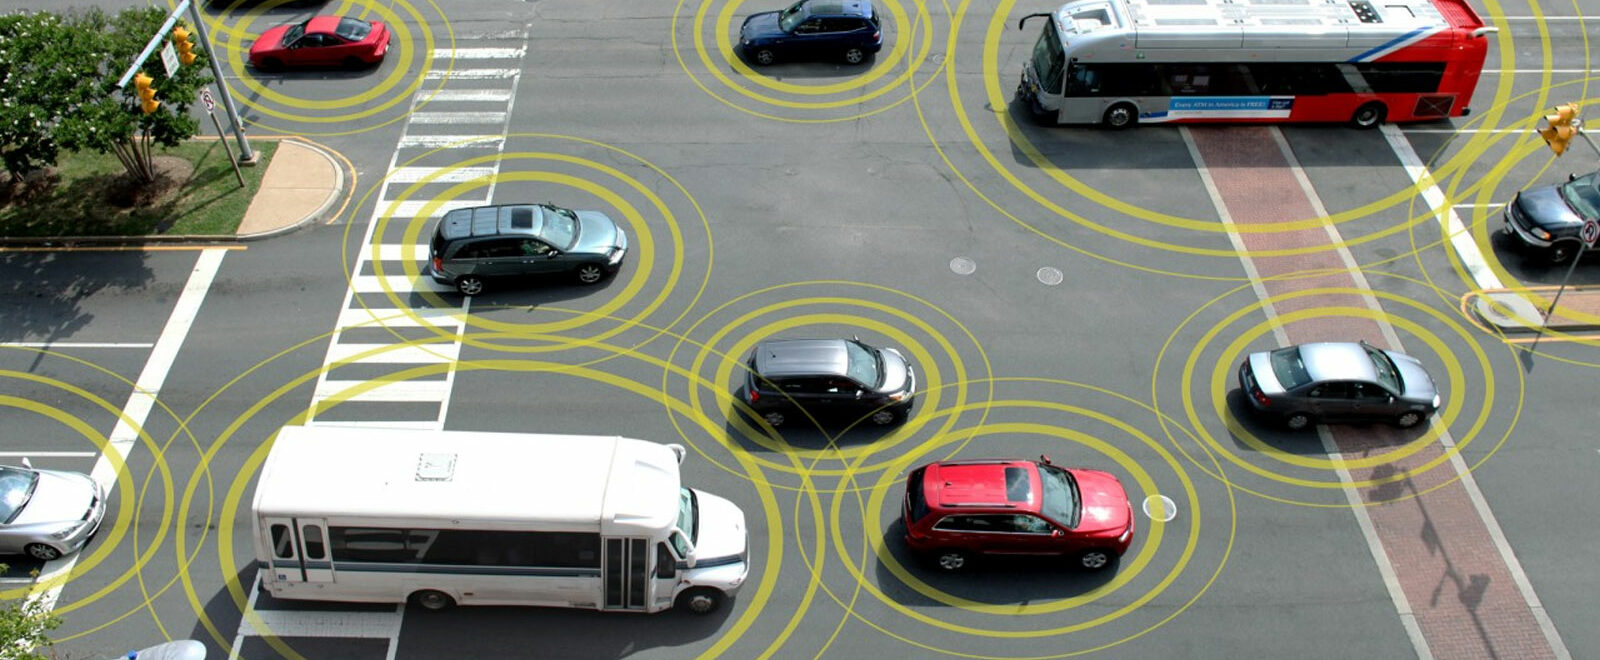 Connected Vehicle Technology